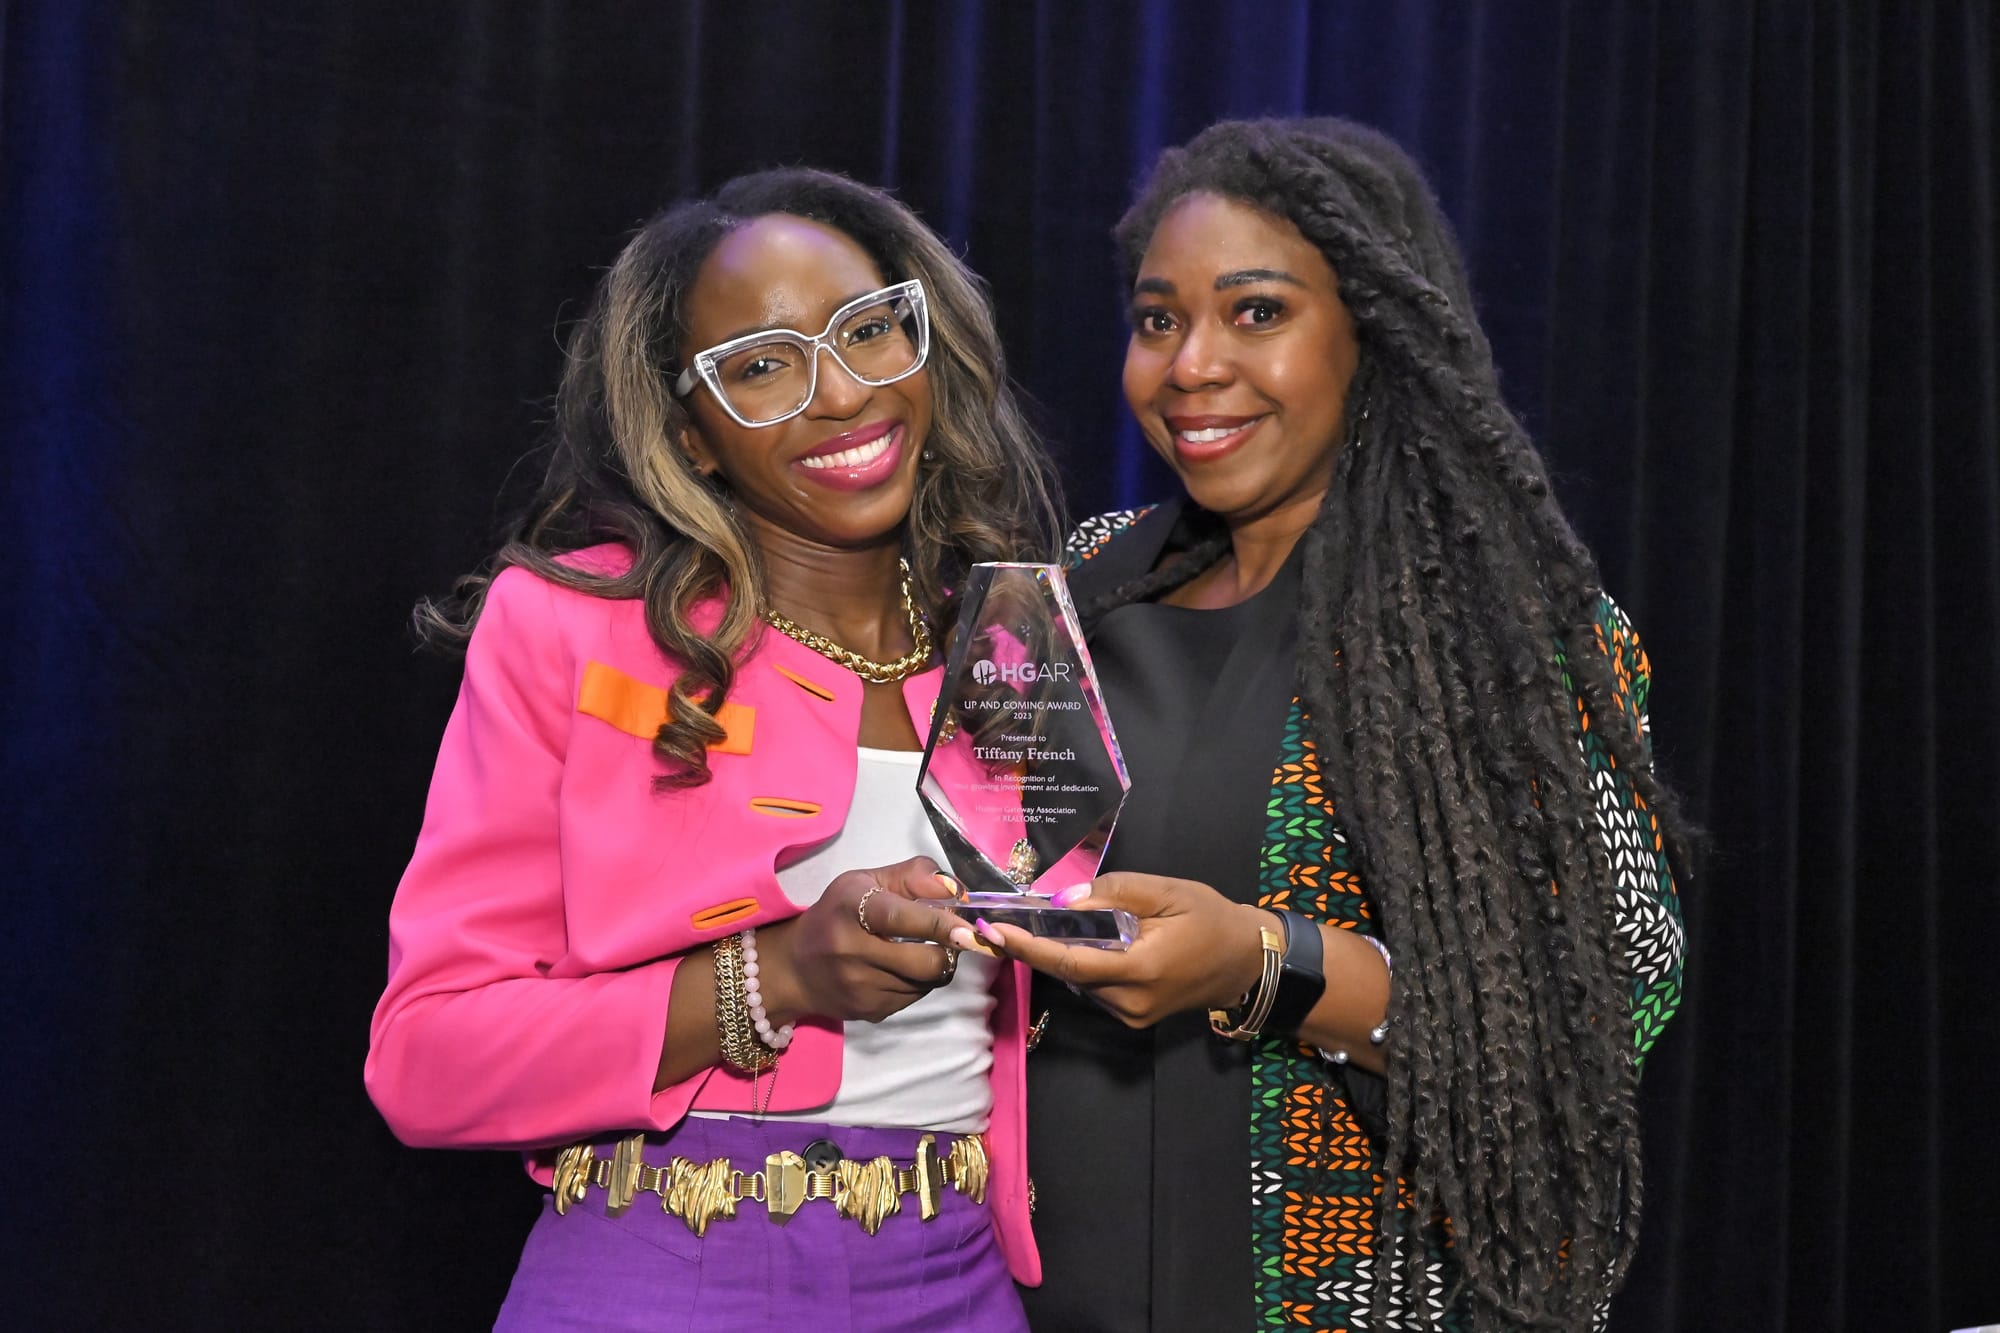 From left, Tiffany French, winner of HGAR’s “Up & Coming Award,” with Crystal Hawkins-Syska, HGAR Recognition Committee Chair